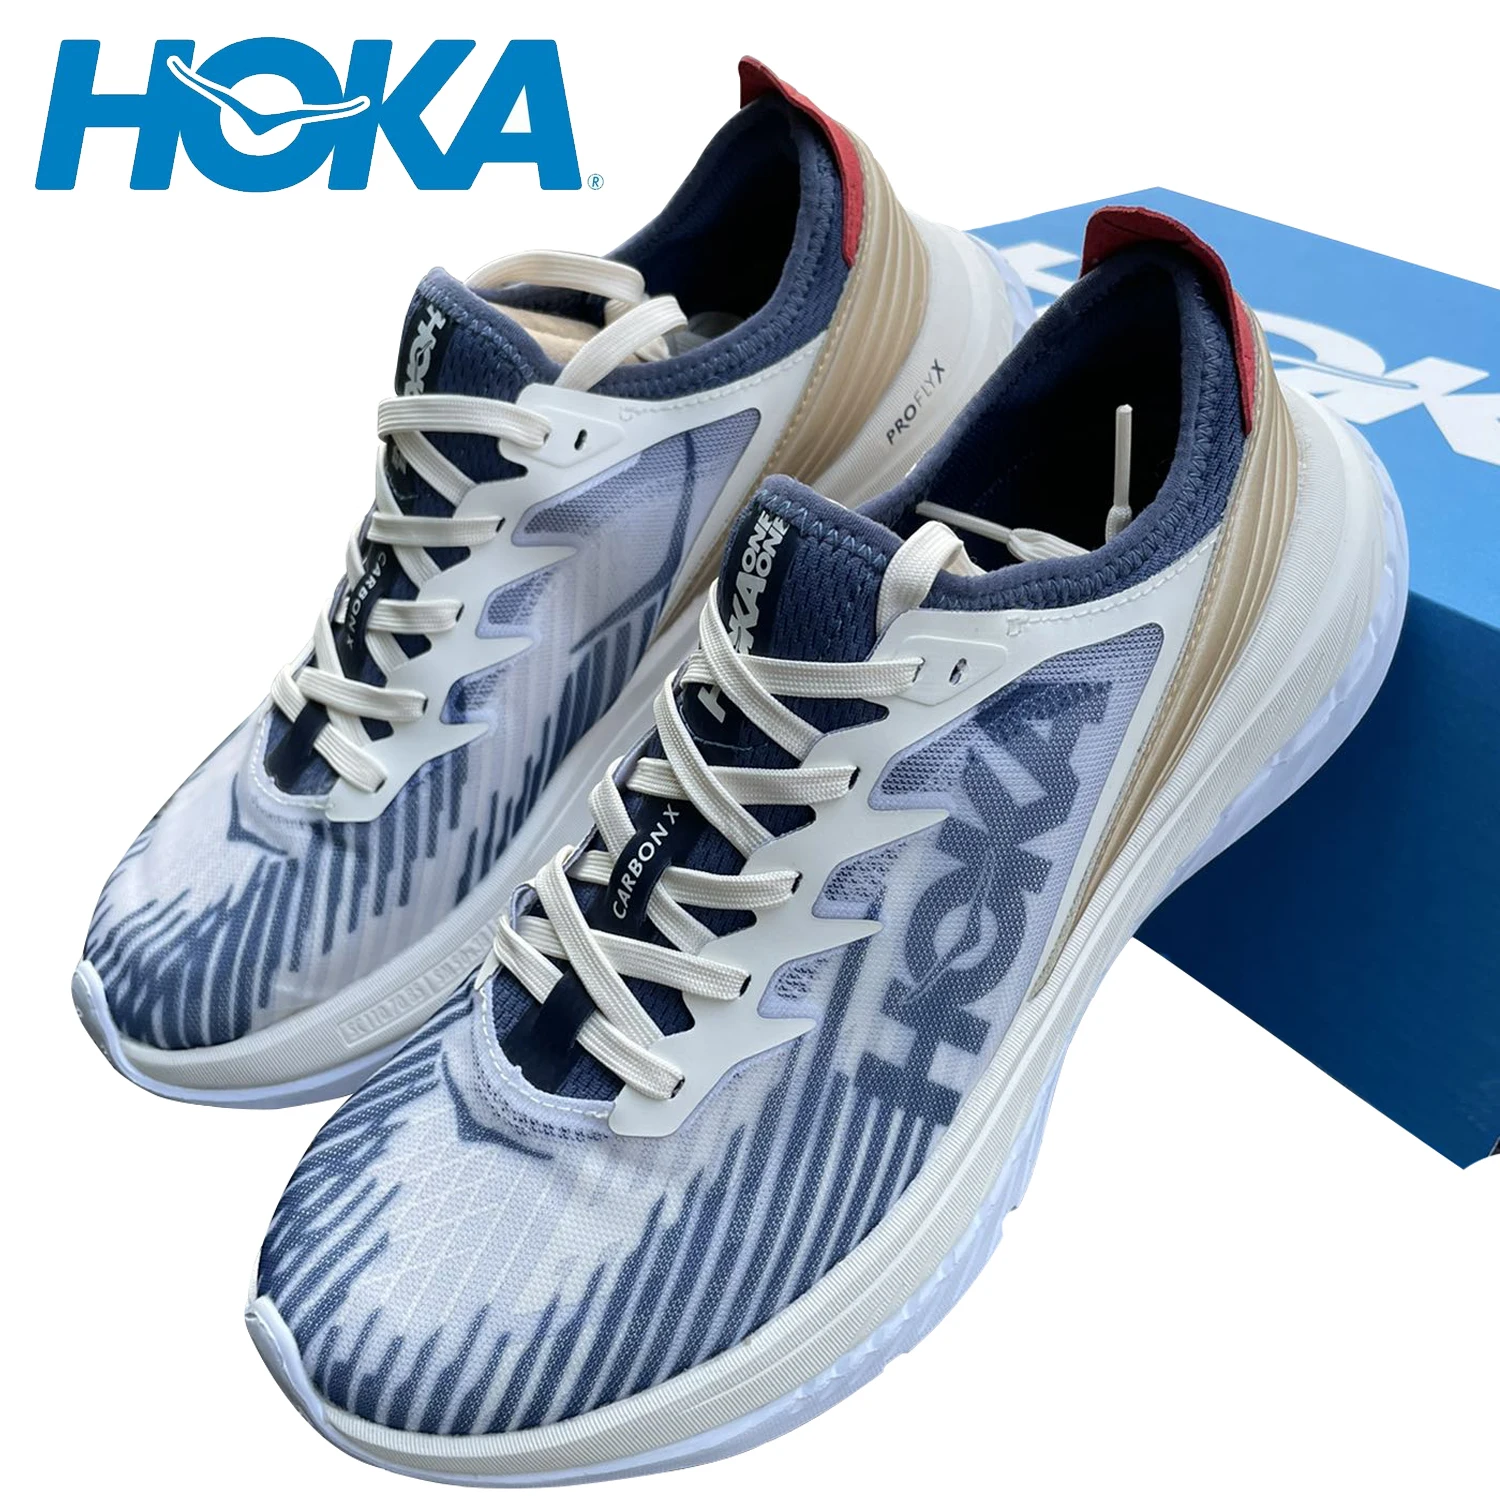 

HOKA Carbon X-SPE Running Shoes Men Road Running Shoes Breathable Stretch Marathon Sneakers Lightweight Cushioning Men Sneakers